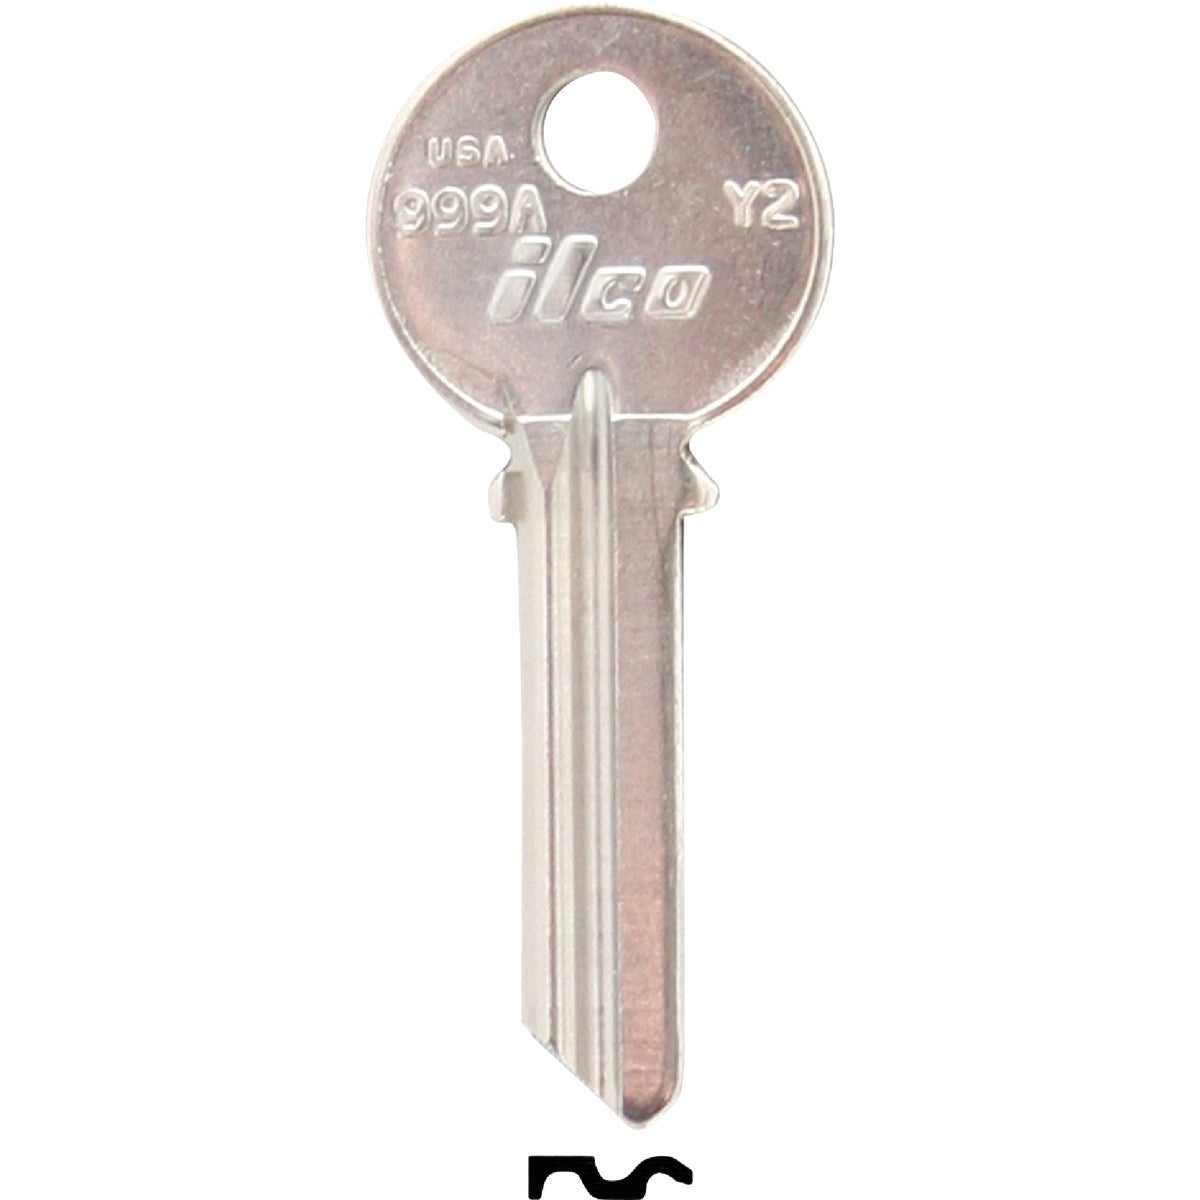 Item 202275, Nickel-plated key blank. When you order one, you will receive 10 keys.